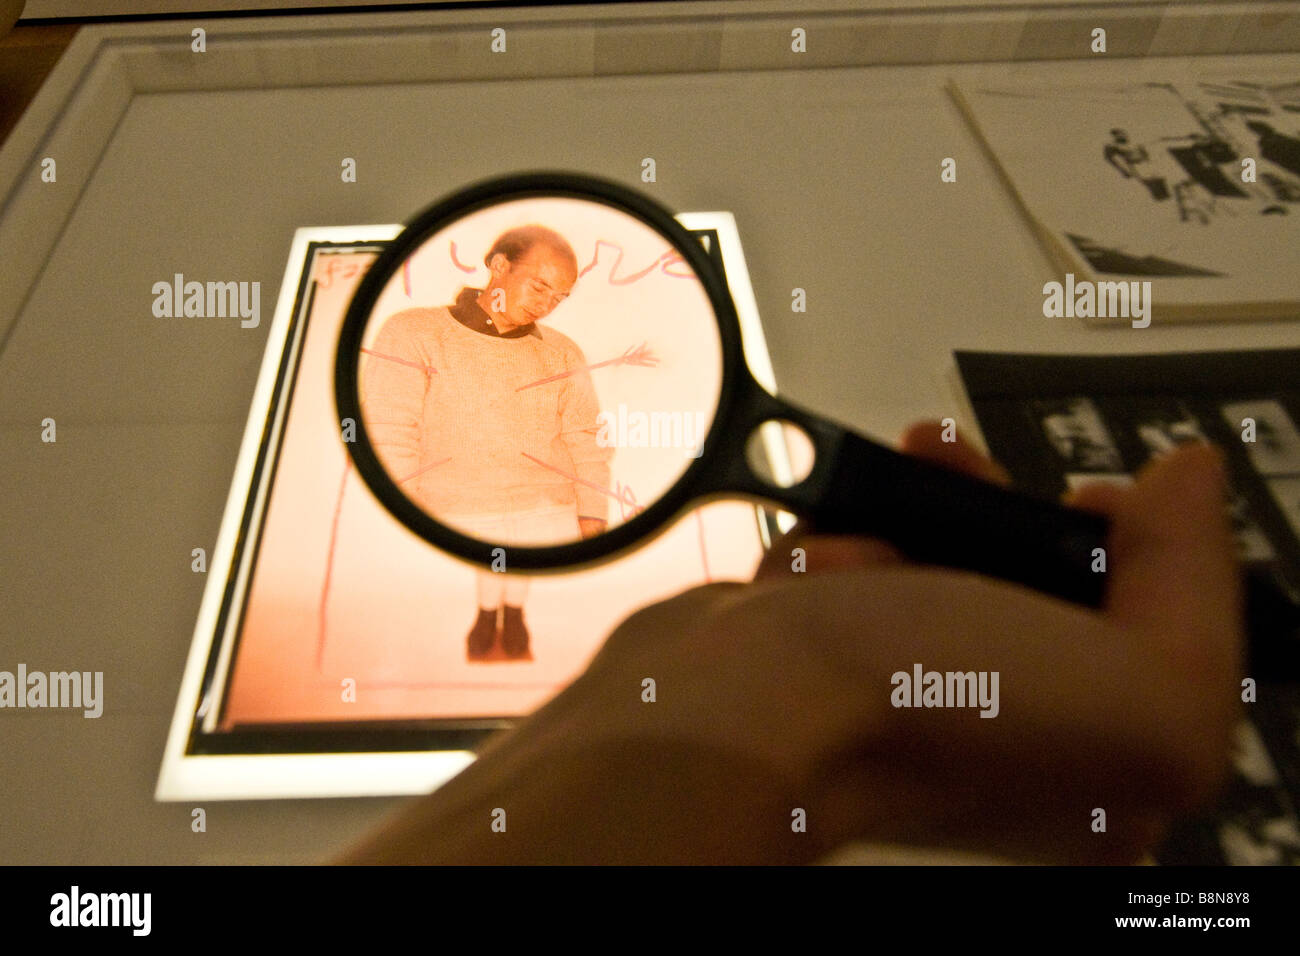 Visitor viewing an exhibit using a magnifying glass at the Museum of modern art Stock Photo